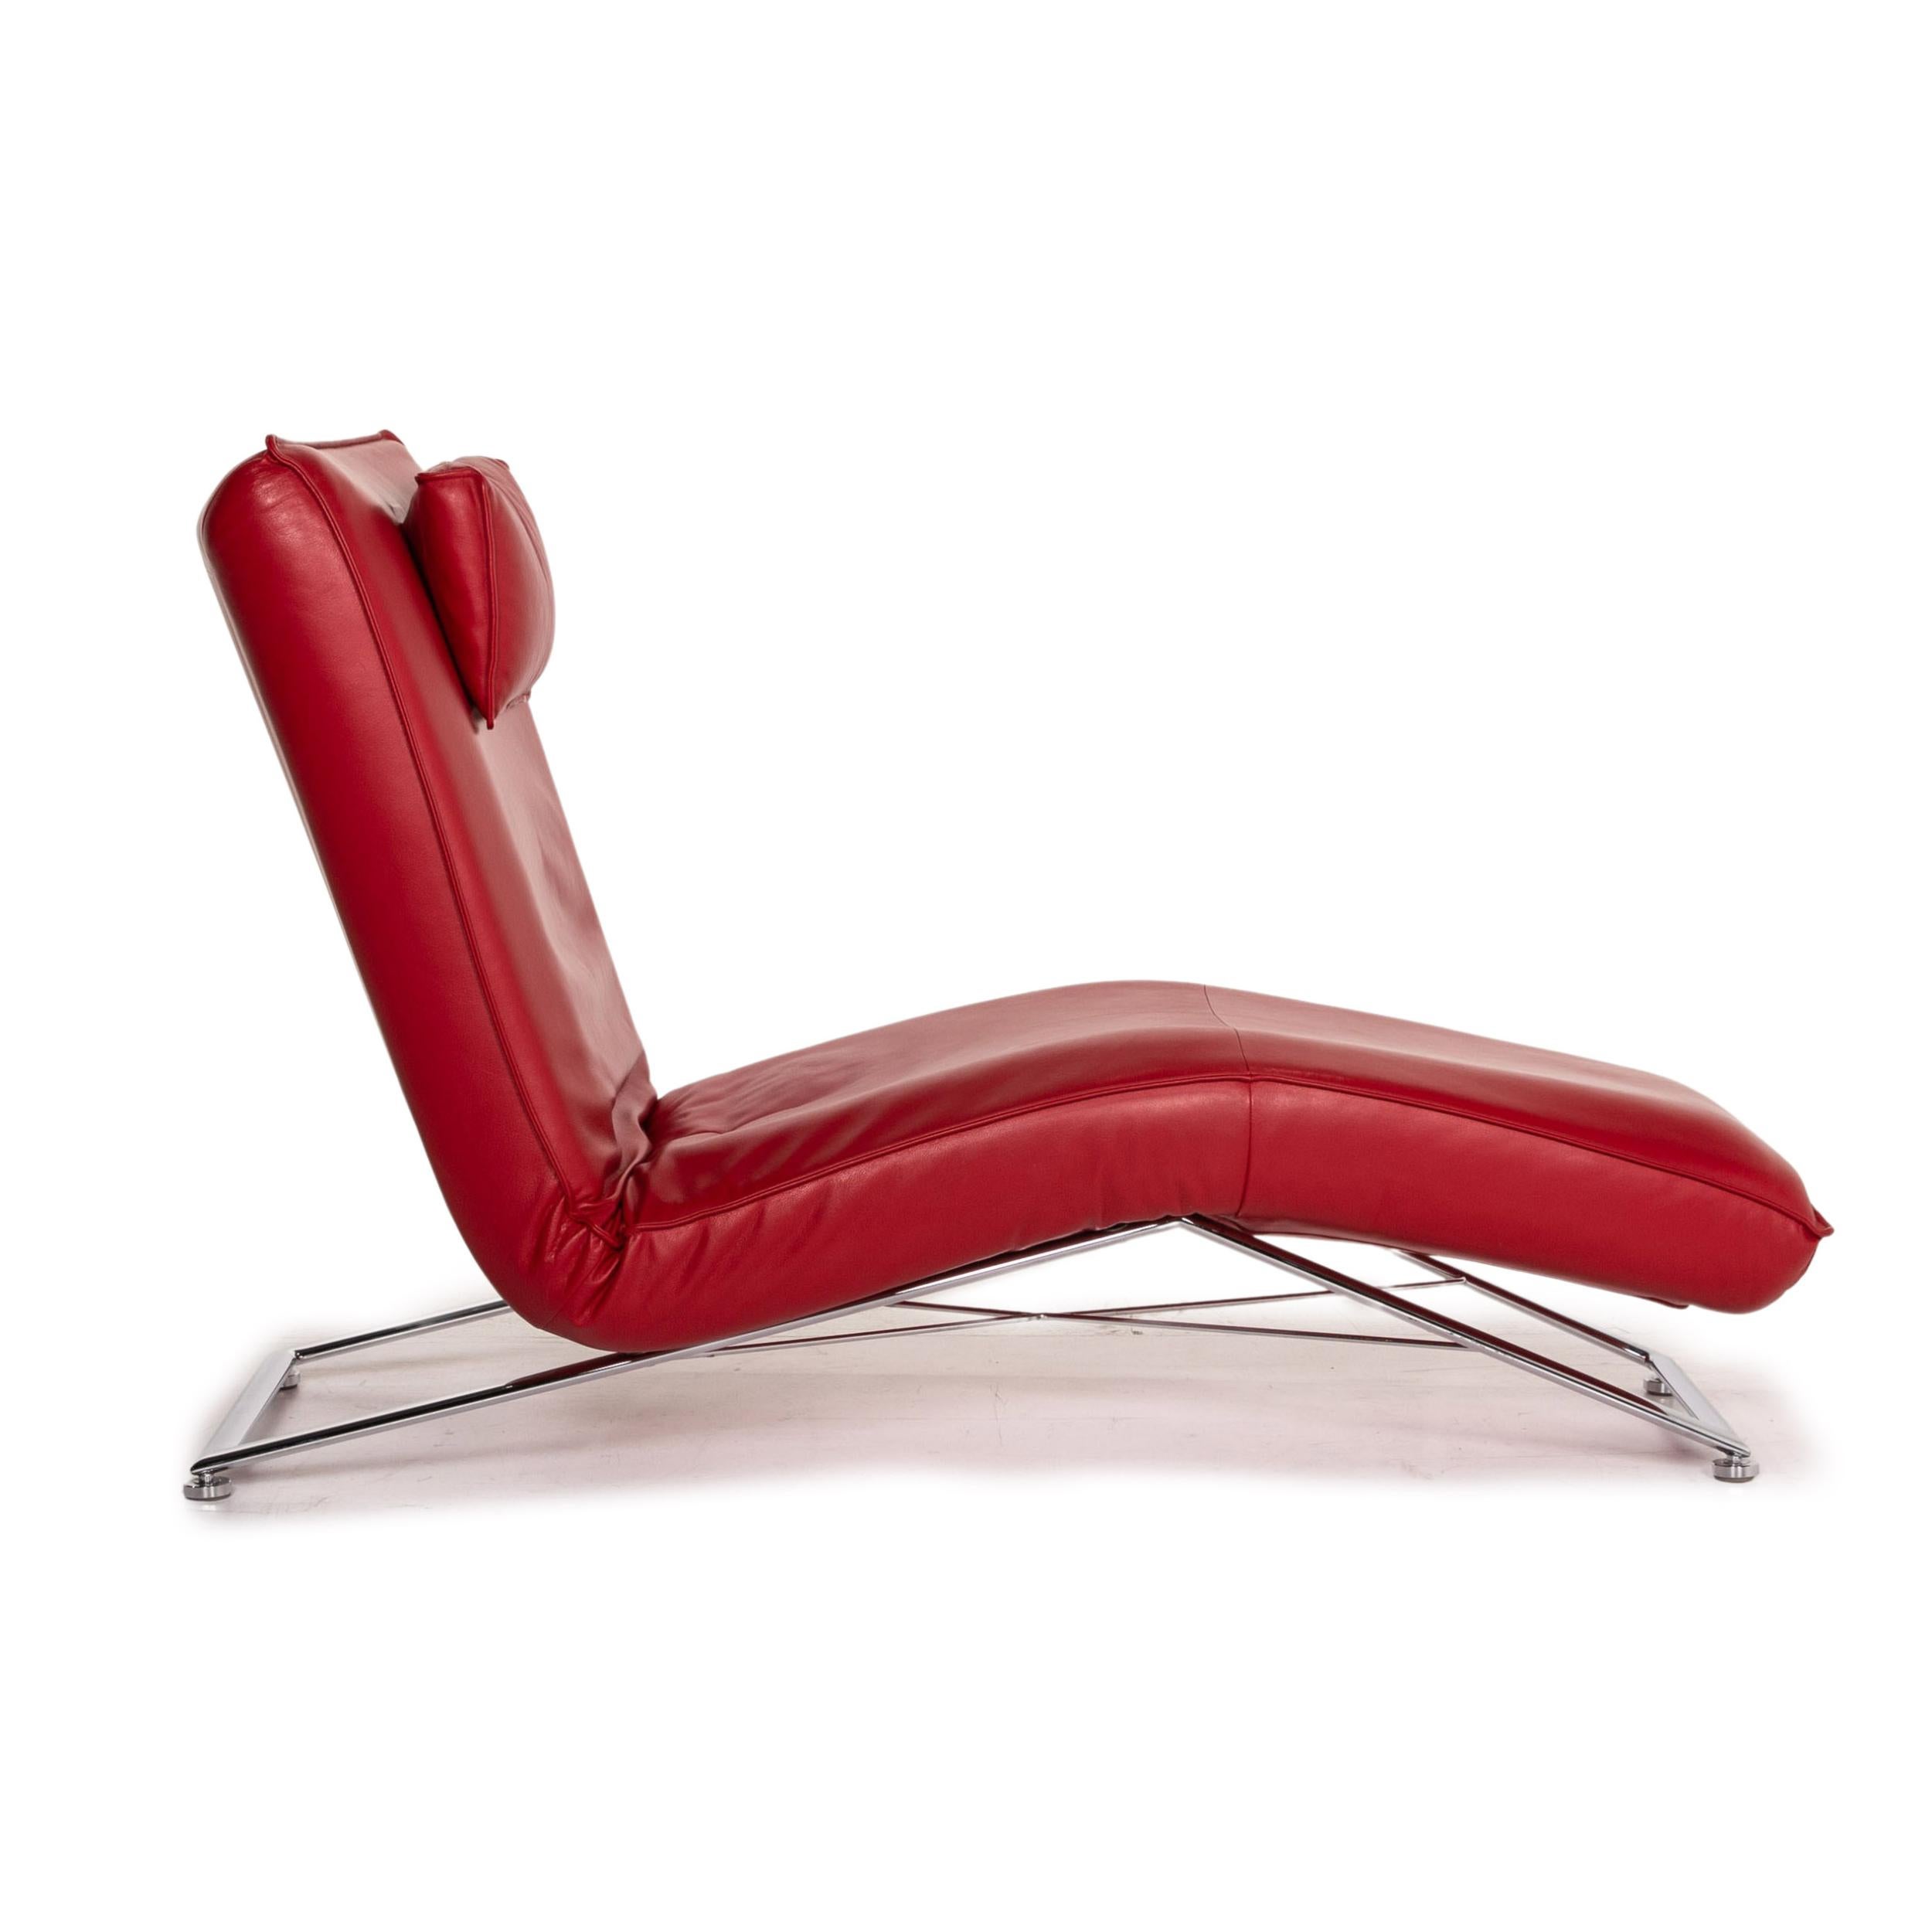 KoinorJeremiah Leather Lounger Red Relaxation Function Relaxation Lounger 4